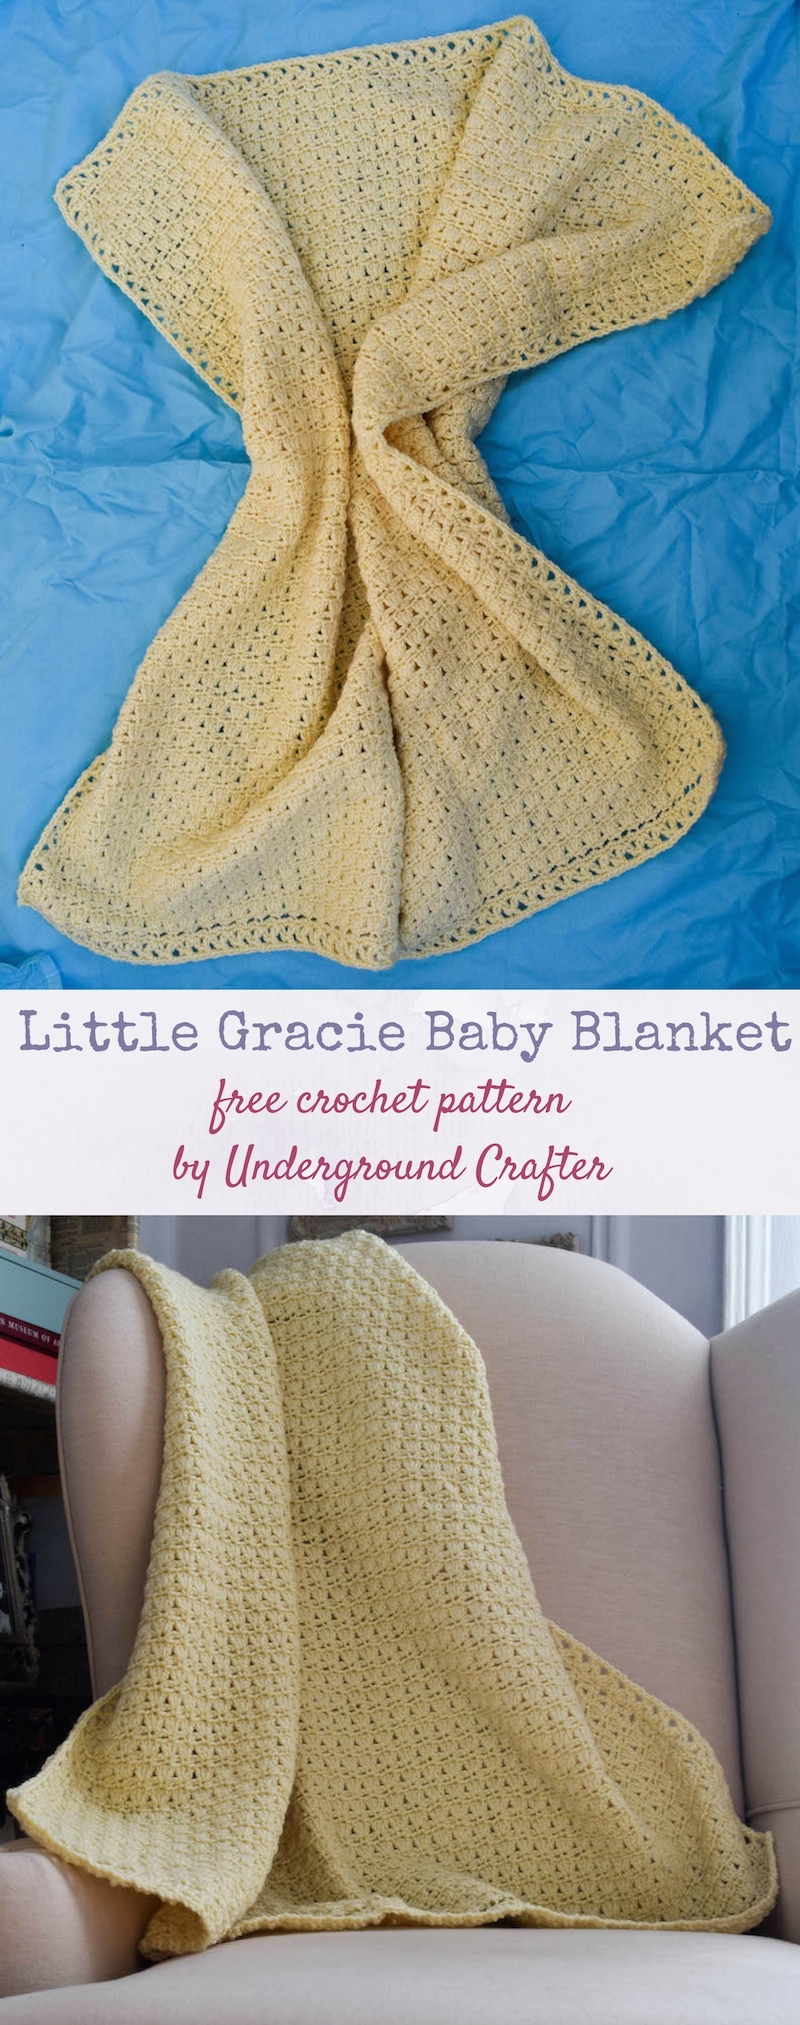 Free crochet pattern: Little Gracie Baby Blanket in Cascade 220 Superwash by Underground Crafter | This simple stitch pattern creates a classic, heirloom quality blanket. Or add stripes for a more vibrant look.